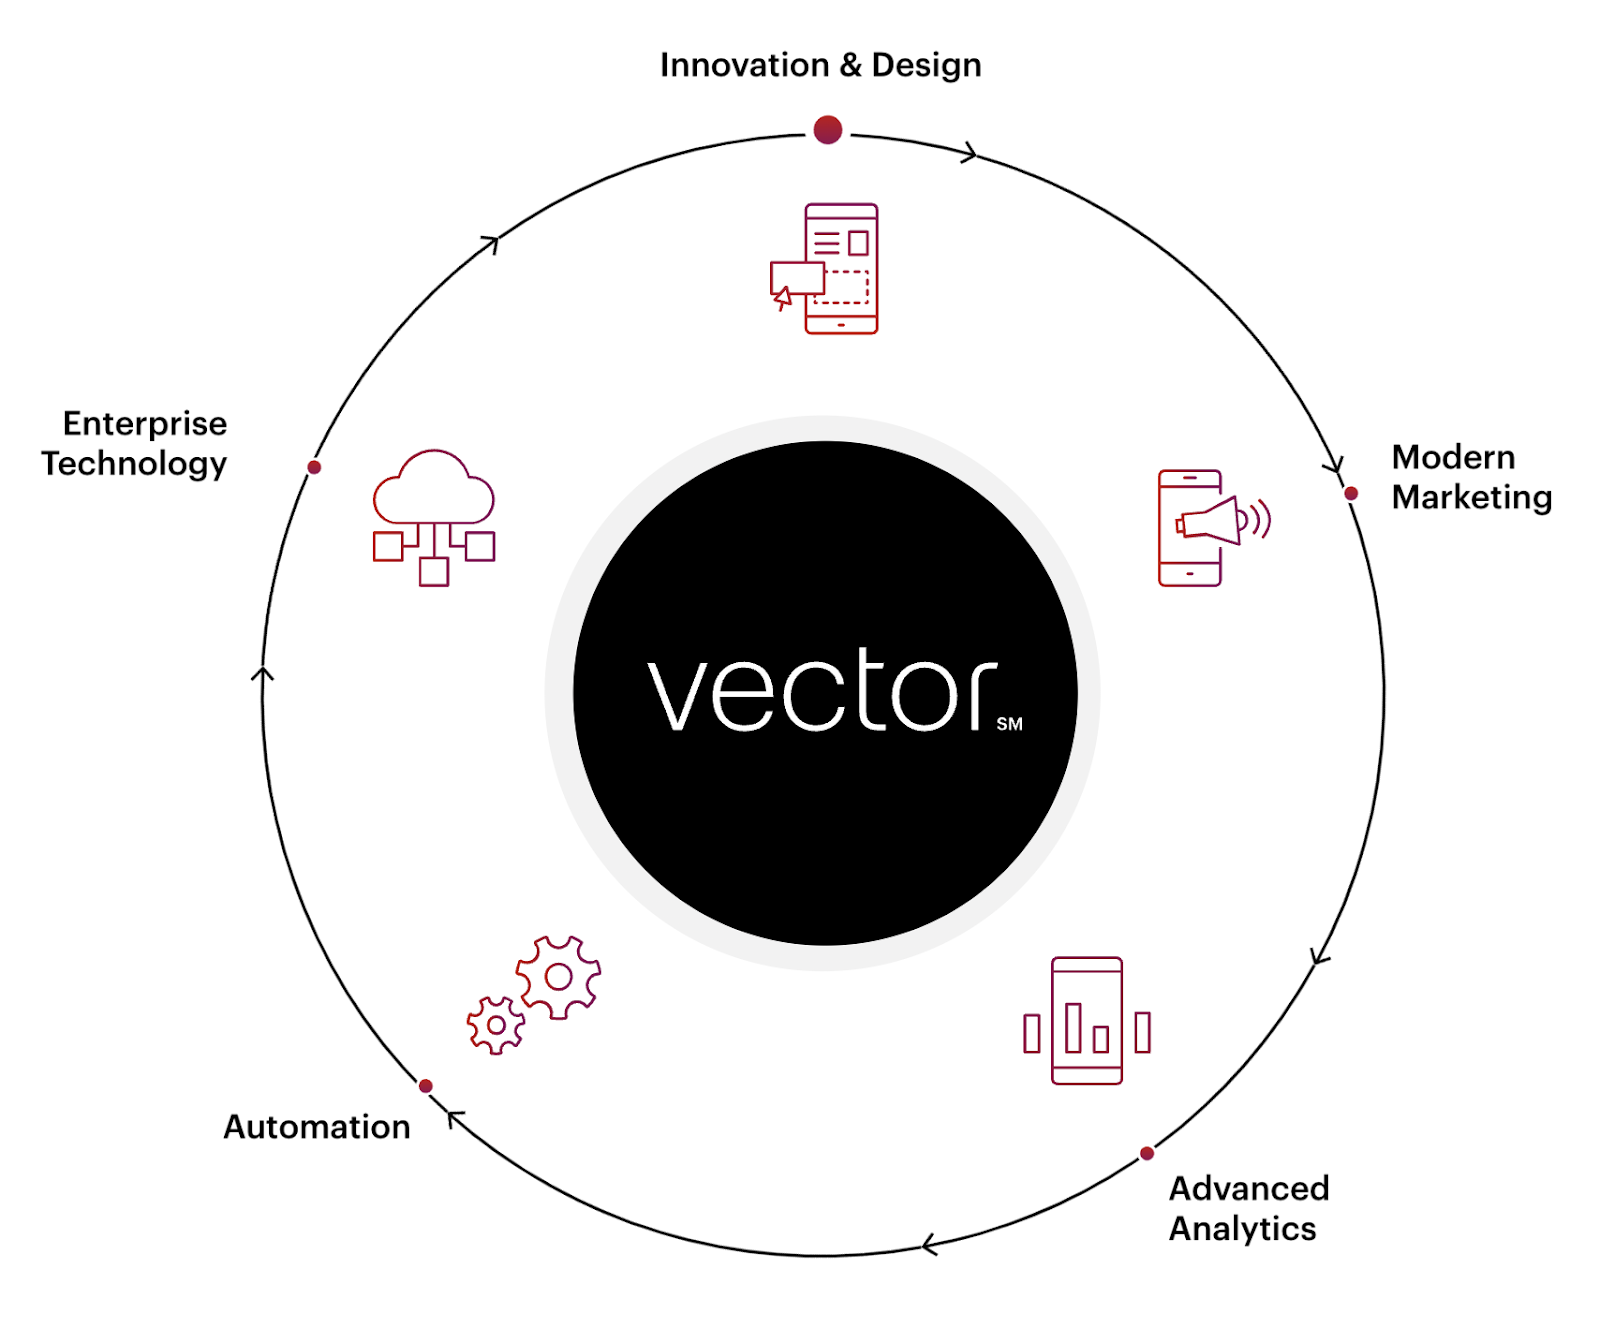 The 5 Angles of Vector℠